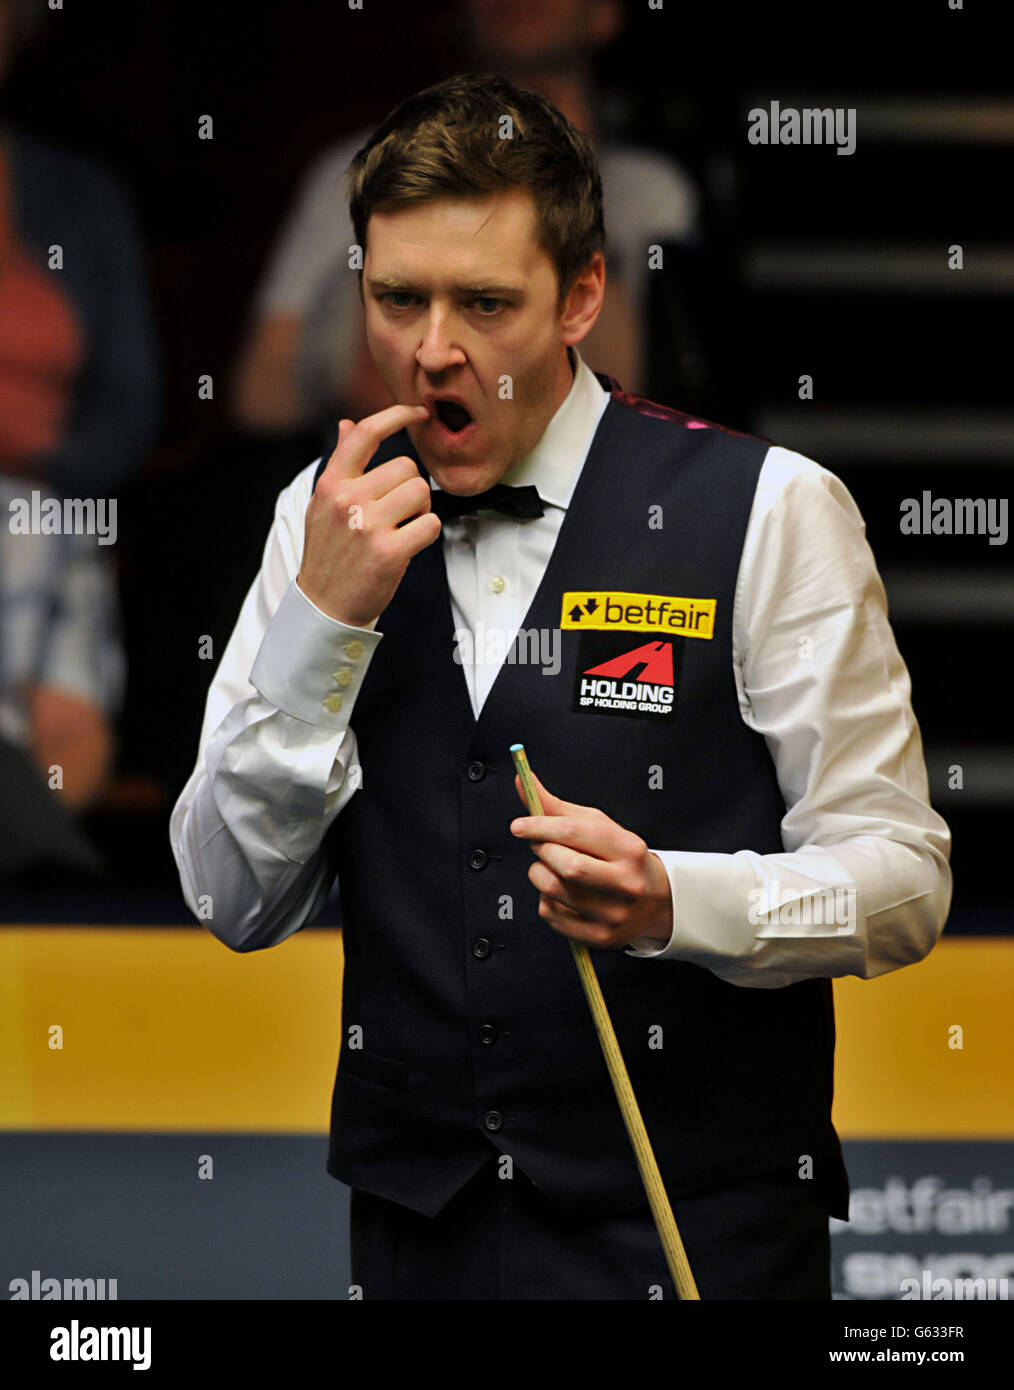 Ricky Waldon reacts during his first round match against Michael Holt during the Betfair World Championships at the Crucible, Sheffield. Stock Photo